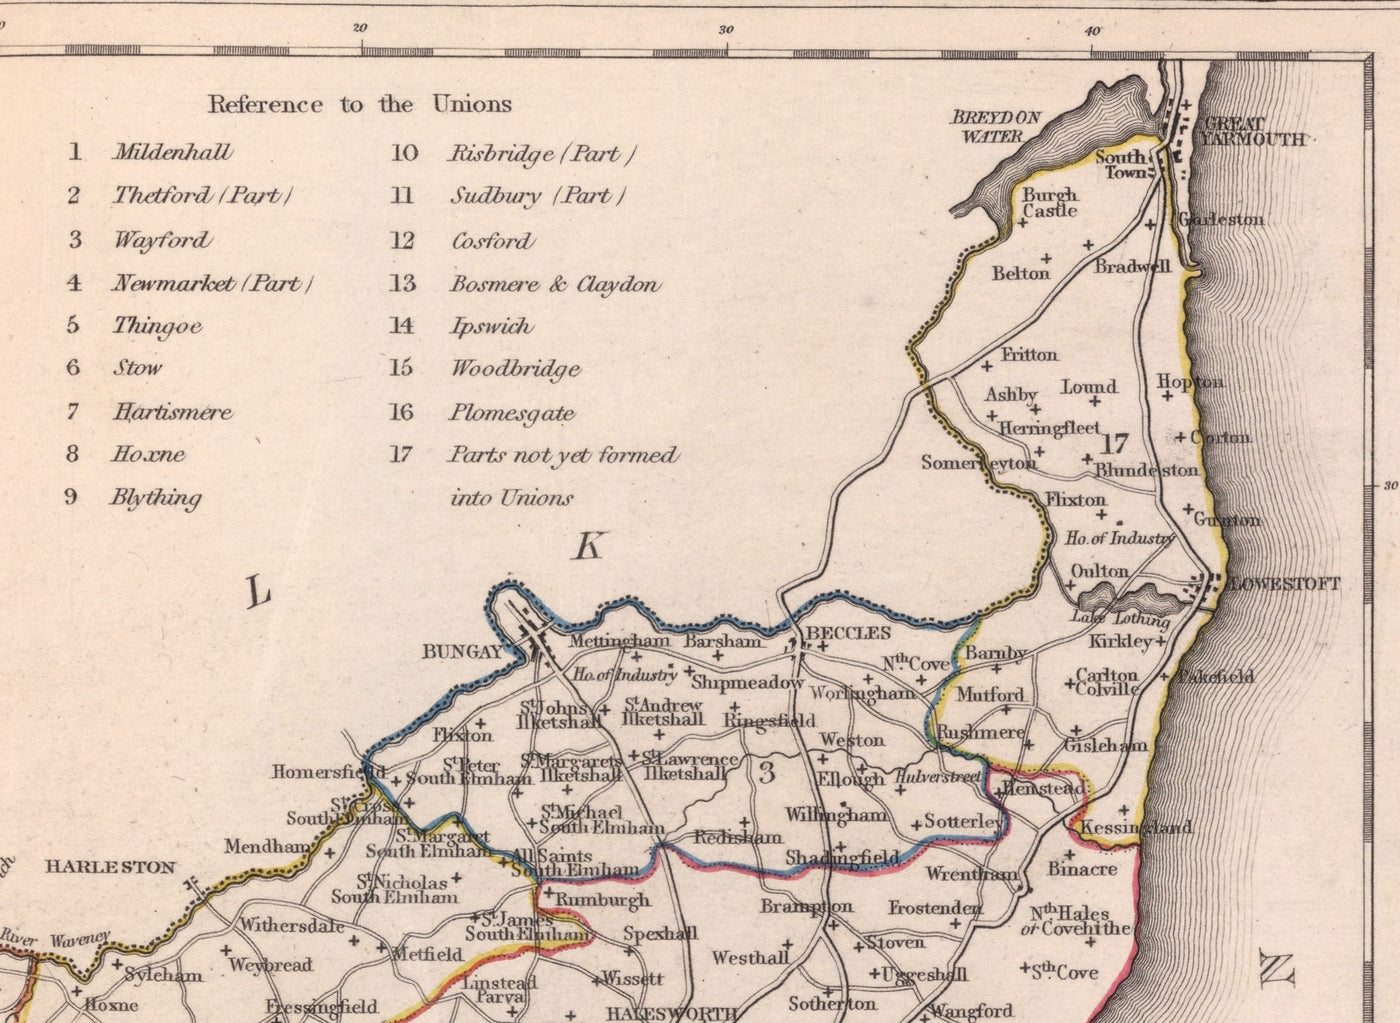 Old Map of Suffolk in 1844 by Samuel Lewis - Ipswich, Woodbridge, Bury St. Edmunds, Thetford, Great Yarmouth